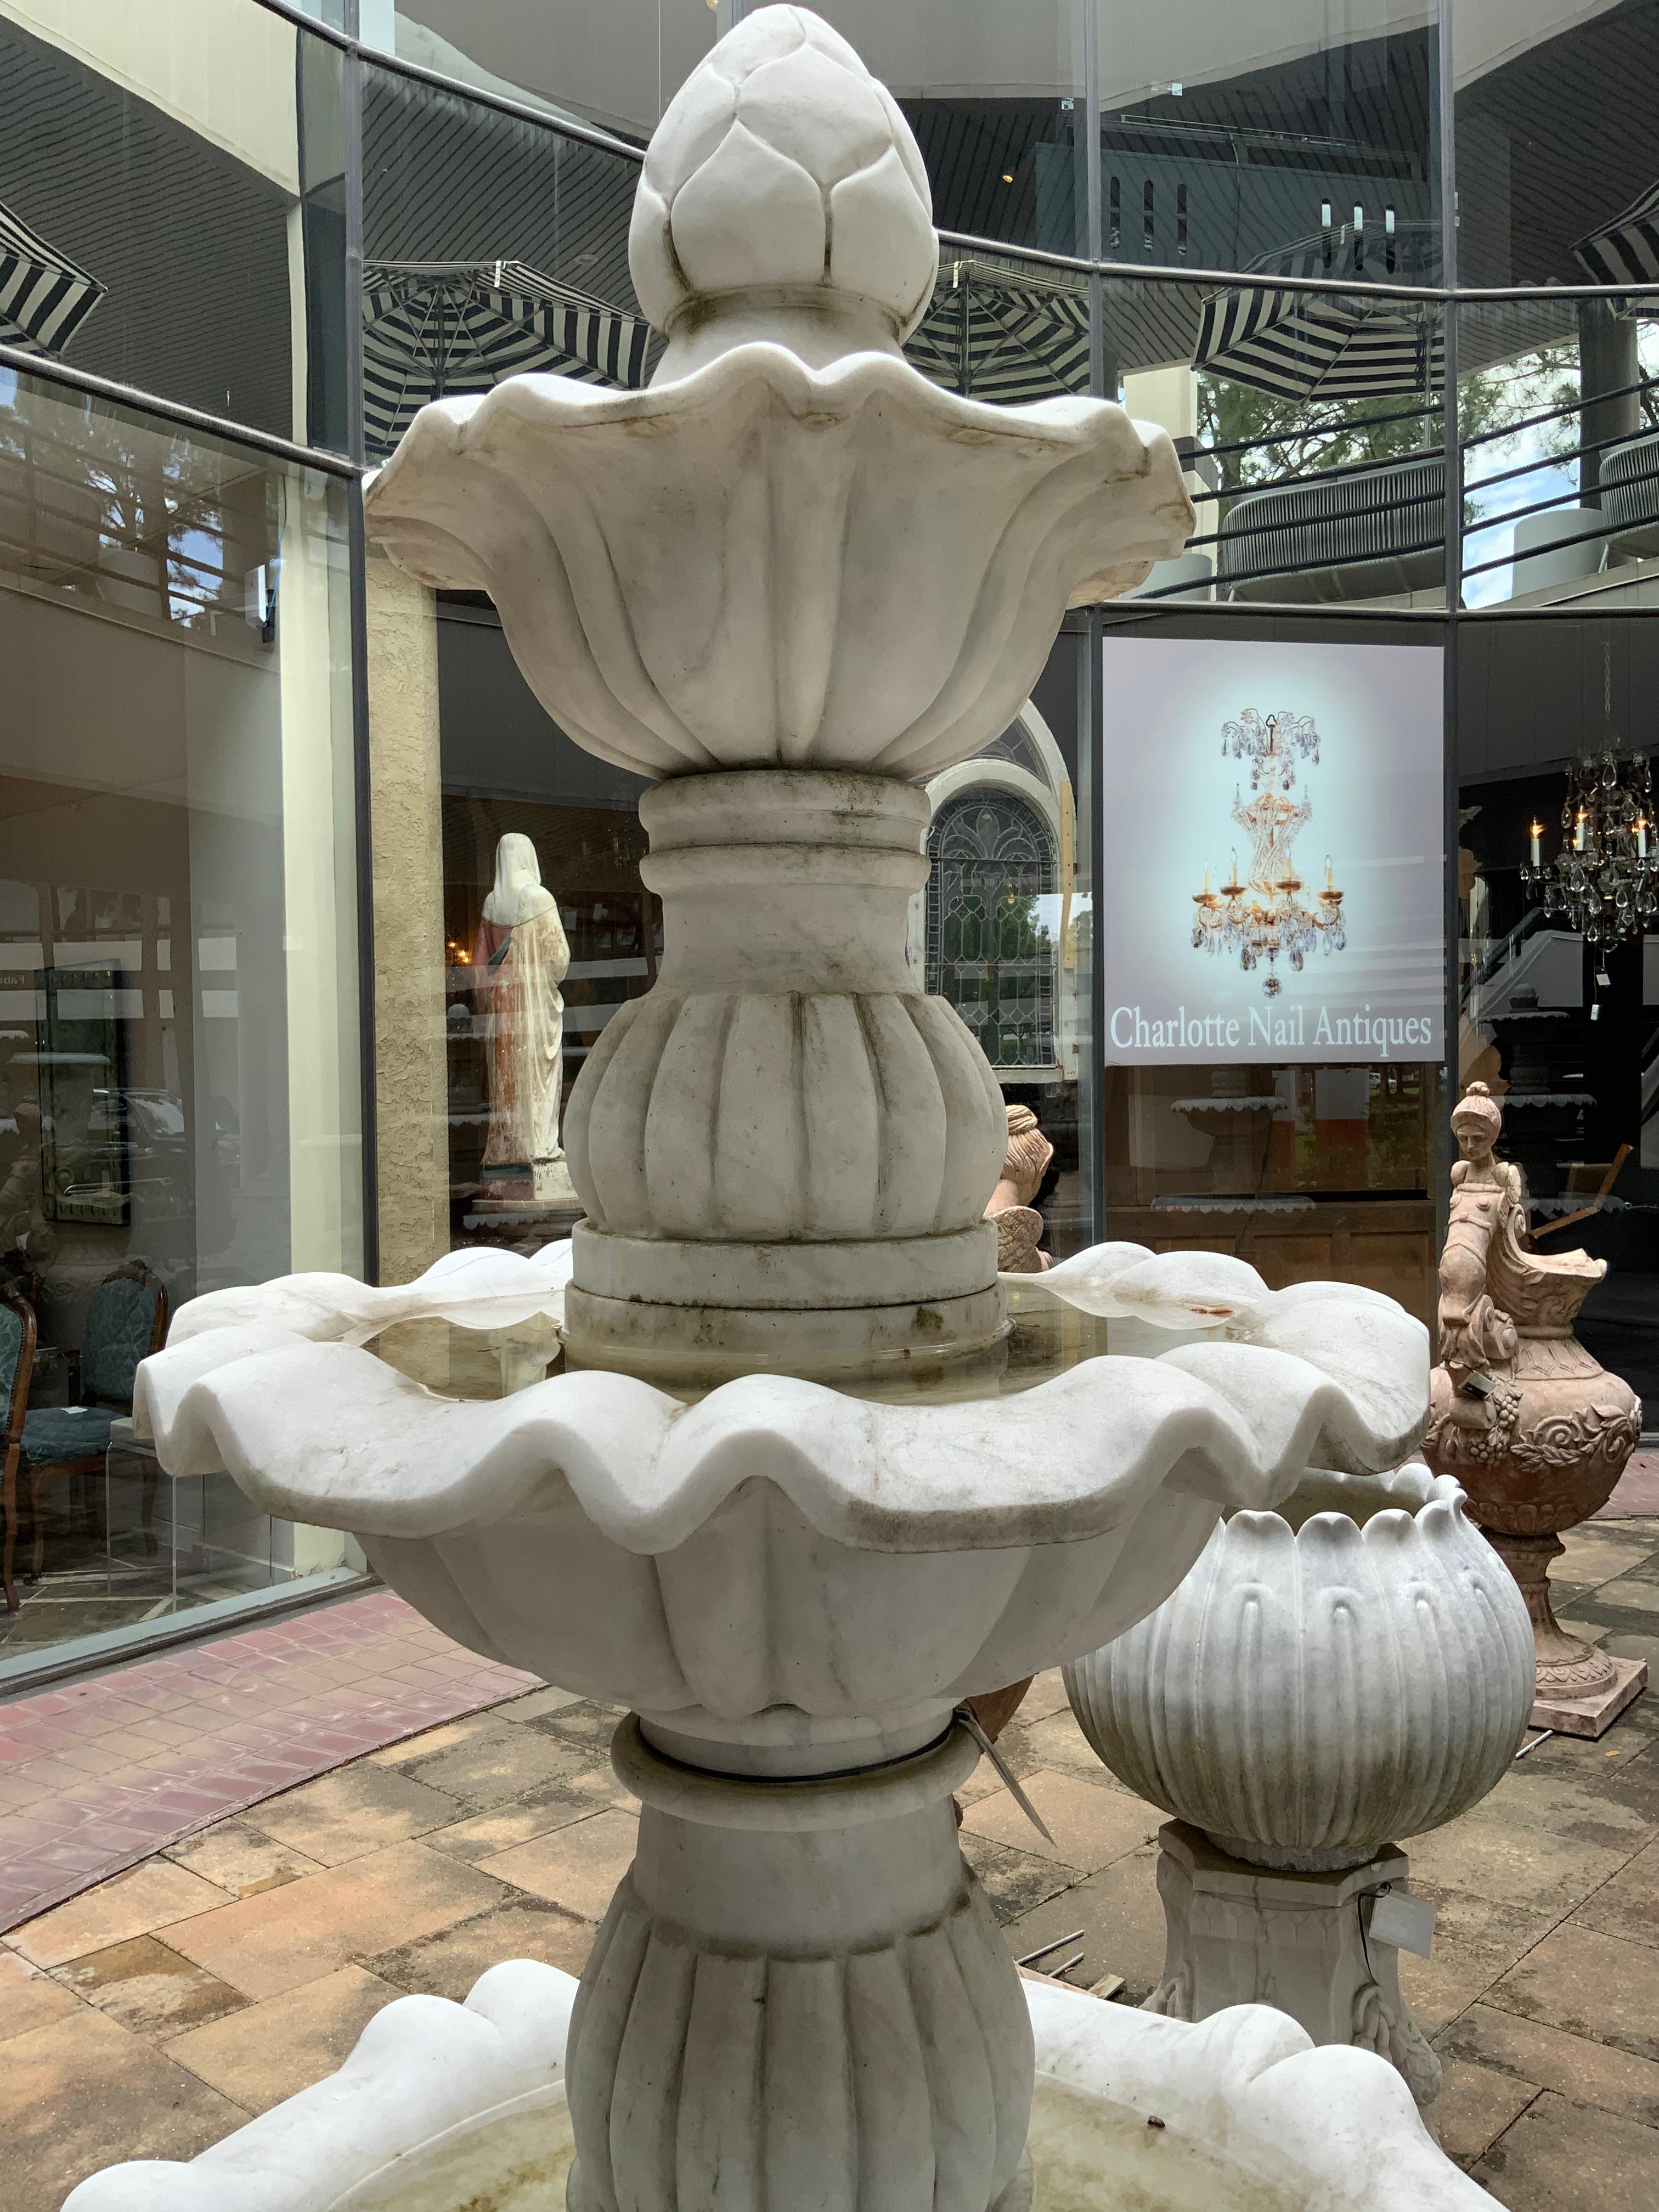 White hand carved marble makes this piece special for your garden.
Three scalloped tiers are graceful and sculpted beautifully.
It ends at the crest with a carved finial. The central post is grooved
For shape and depth. It comes apart for